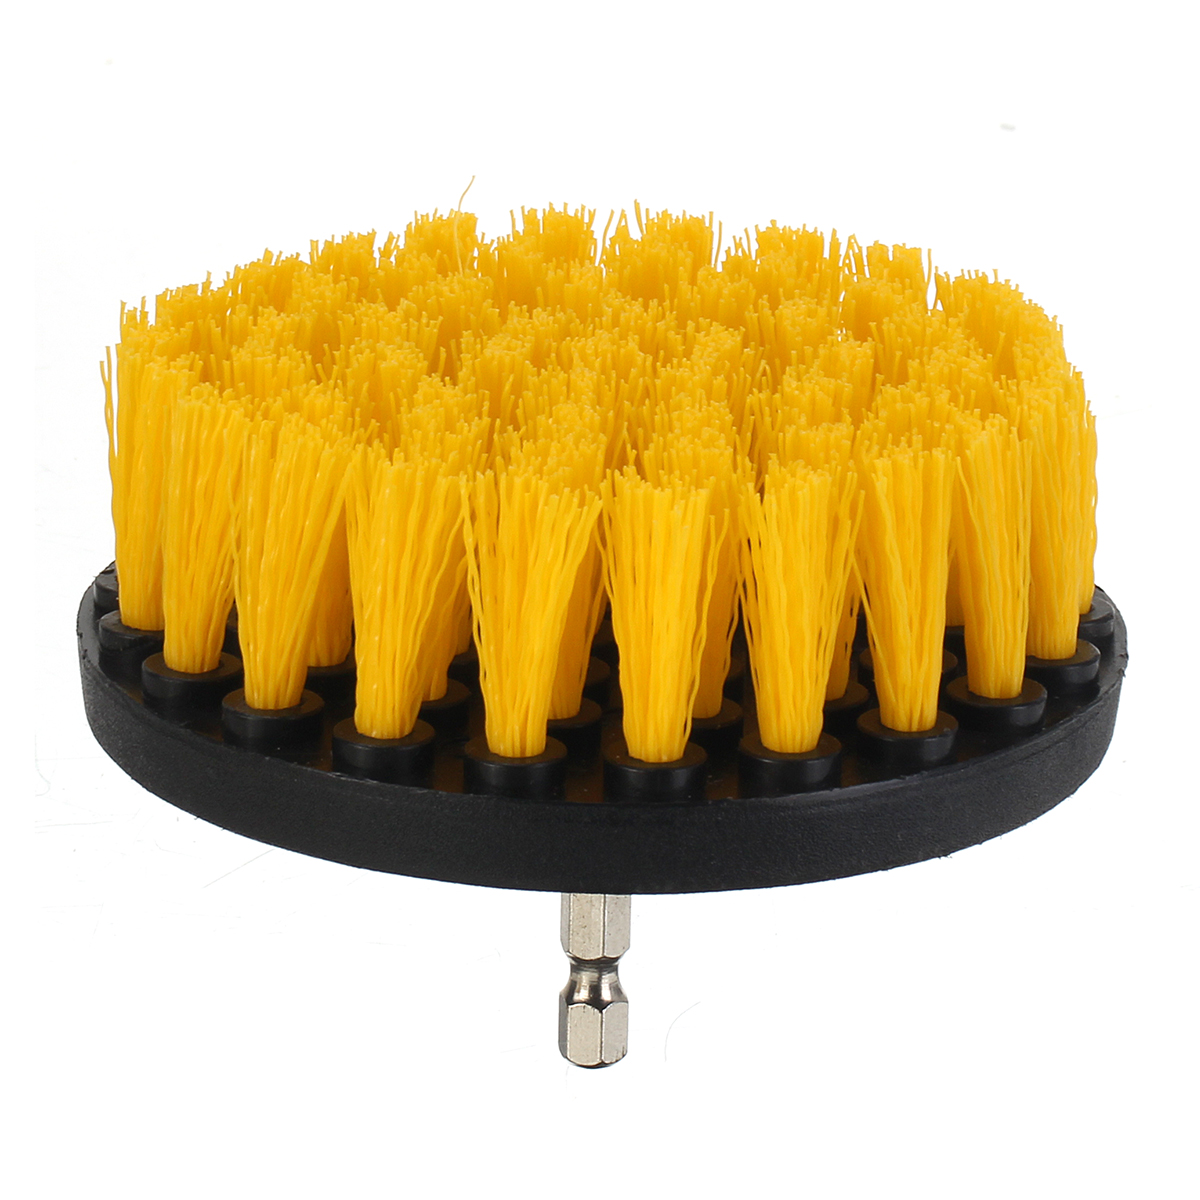 9 PCS Car Cleaning Detailing Brush Set Dirt Dust Clean Brush for Car Motorcycle Air Vents